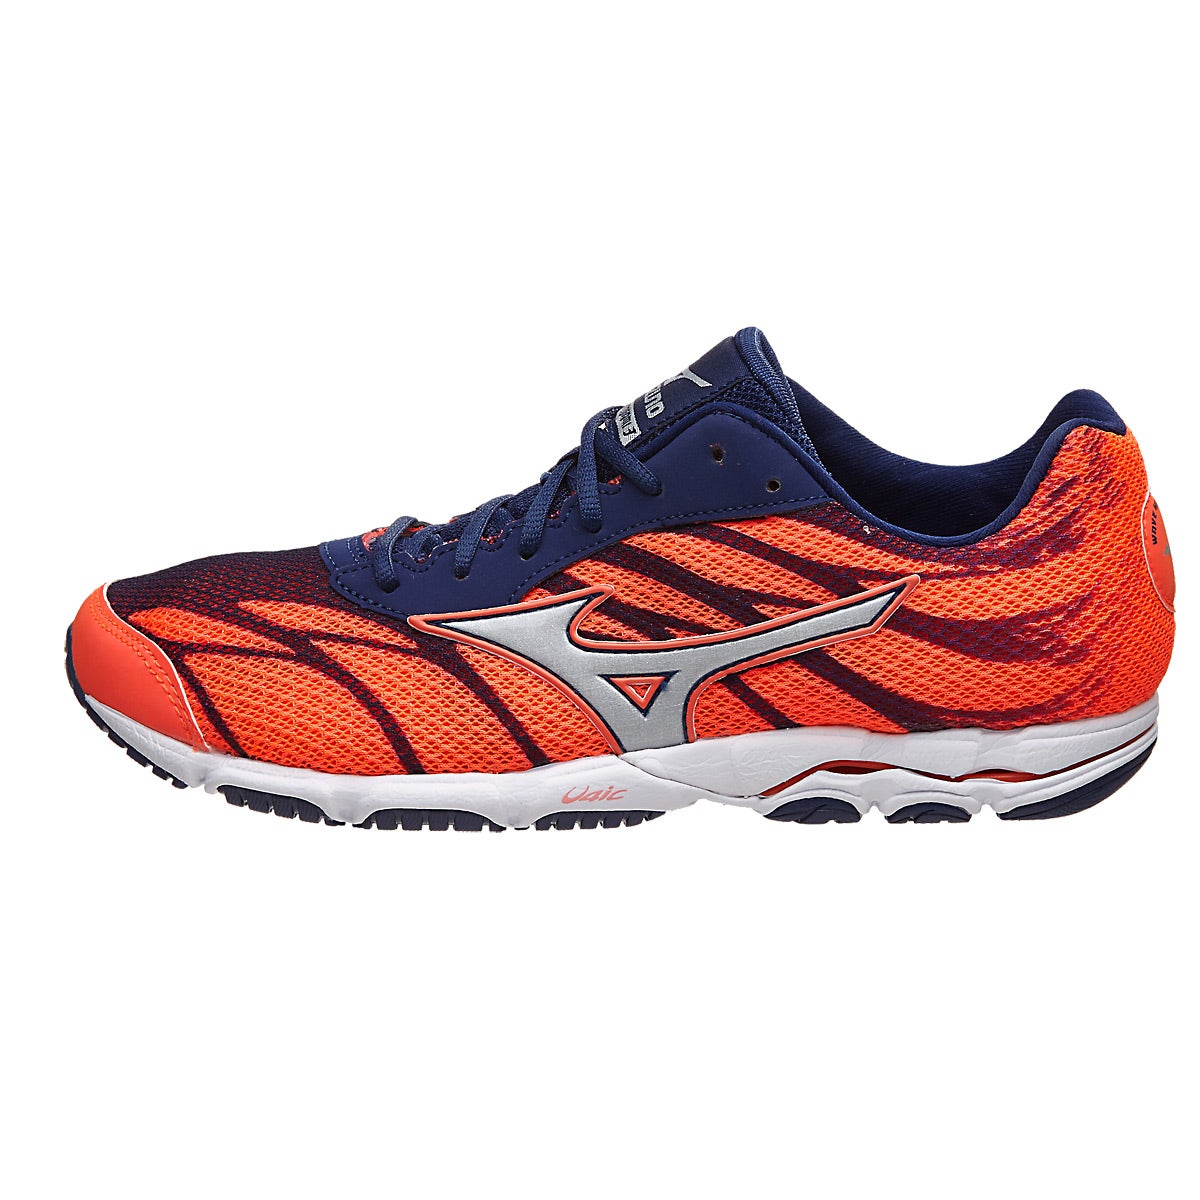 Mizuno Wave Hitogami 3 Women's Shoes Coral/Blue/Whit 360° View ...